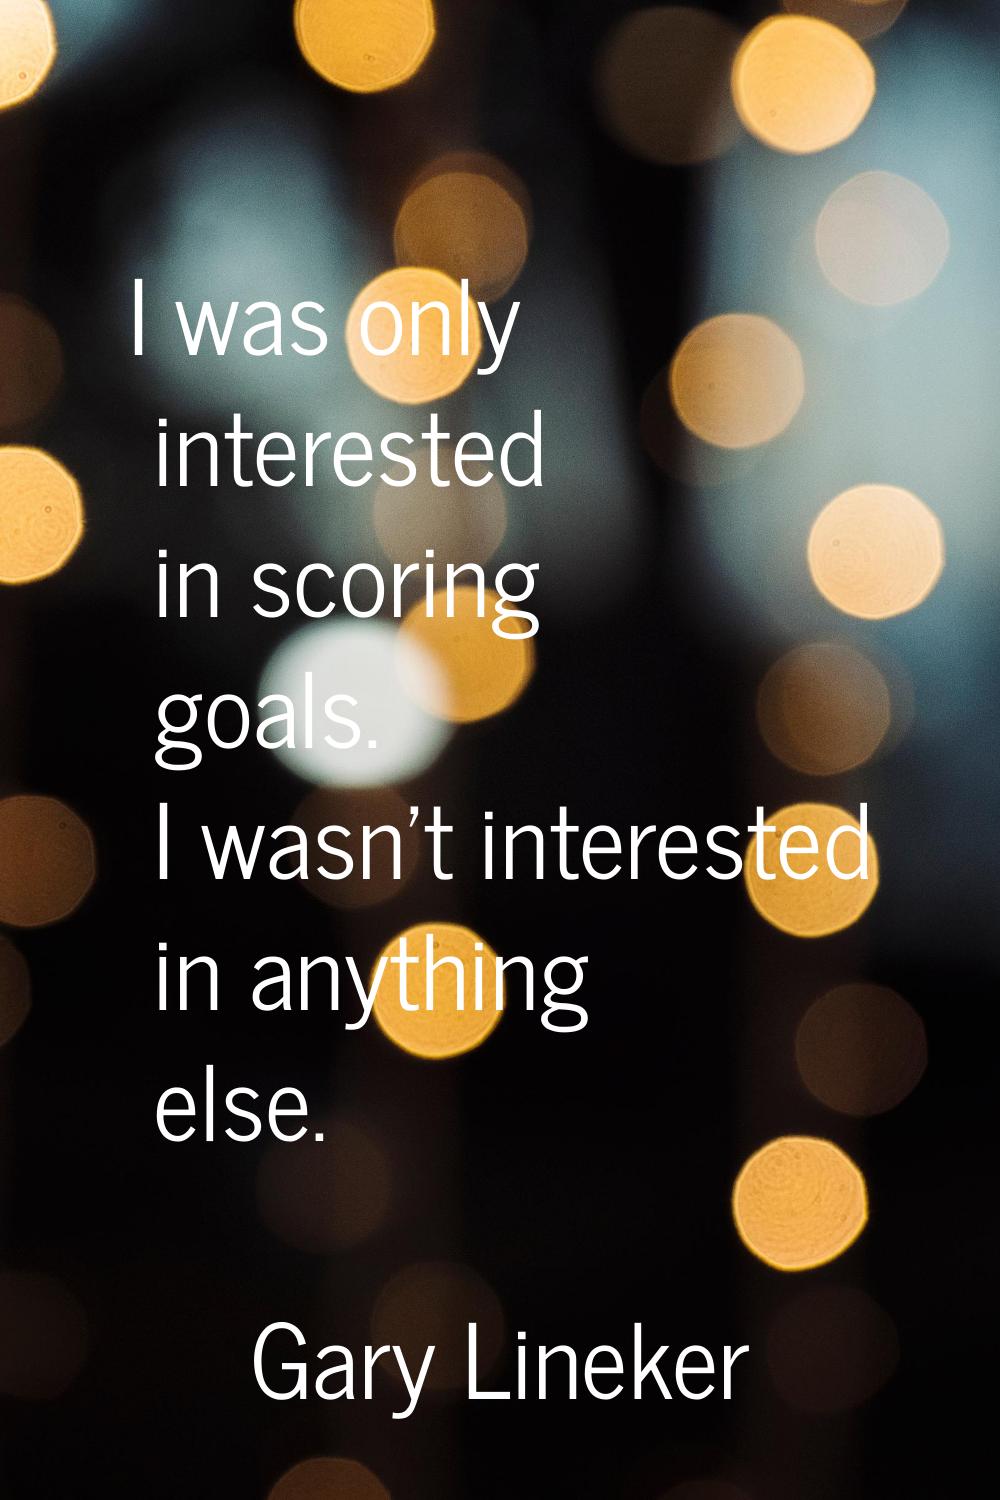 I was only interested in scoring goals. I wasn't interested in anything else.